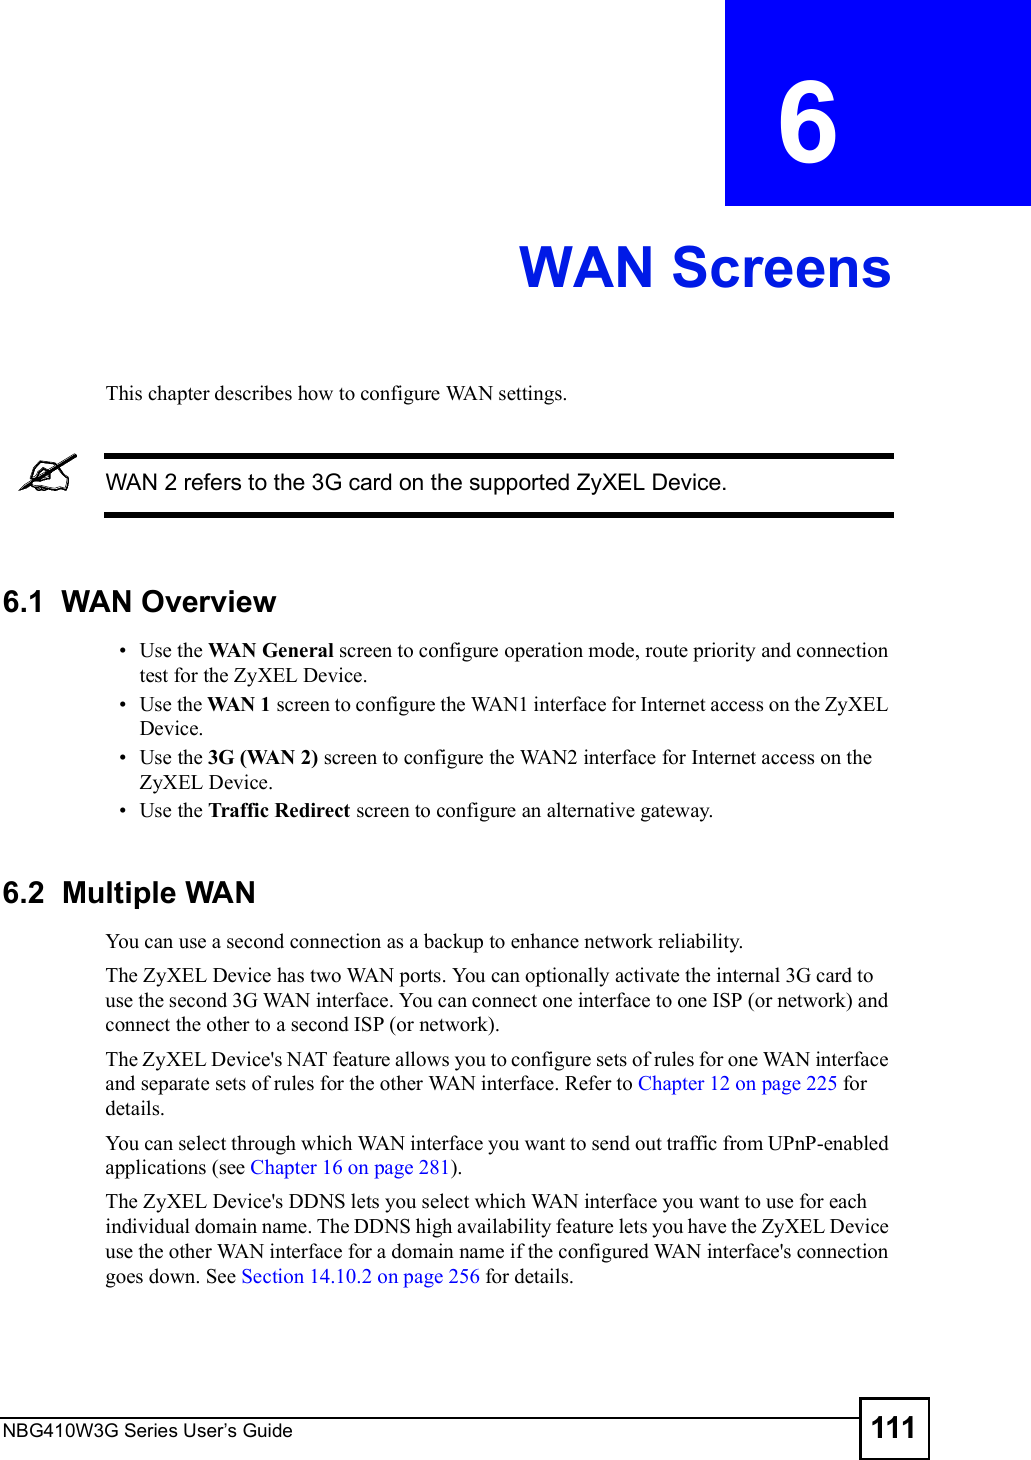 NBG410W3G Series User s Guide 111CHAPTER  6 WAN ScreensThis chapter describes how to configure WAN settings. WAN 2 refers to the 3G card on the supported ZyXEL Device.6.1  WAN Overview Use the WAN General screen to configure operation mode, route priority and connection test for the ZyXEL Device.  Use the WAN 1 screen to configure the WAN1 interface for Internet access on the ZyXEL Device. Use the 3G (WAN 2) screen to configure the WAN2 interface for Internet access on the ZyXEL Device. Use the Traffic Redirect screen to configure an alternative gateway.6.2  Multiple WAN You can use a second connection as a backup to enhance network reliability. The ZyXEL Device has two WAN ports. You can optionally activate the internal 3G card to use the second 3G WAN interface. You can connect one interface to one ISP (or network) and connect the other to a second ISP (or network). The ZyXEL Device&apos;s NAT feature allows you to configure sets of rules for one WAN interface and separate sets of rules for the other WAN interface. Refer to Chapter 12 on page 225 for details.You can select through which WAN interface you want to send out traffic from UPnP-enabled applications (see Chapter 16 on page 281). The ZyXEL Device&apos;s DDNS lets you select which WAN interface you want to use for each individual domain name. The DDNS high availability feature lets you have the ZyXEL Device use the other WAN interface for a domain name if the configured WAN interface&apos;s connection goes down. See Section 14.10.2 on page 256 for details.